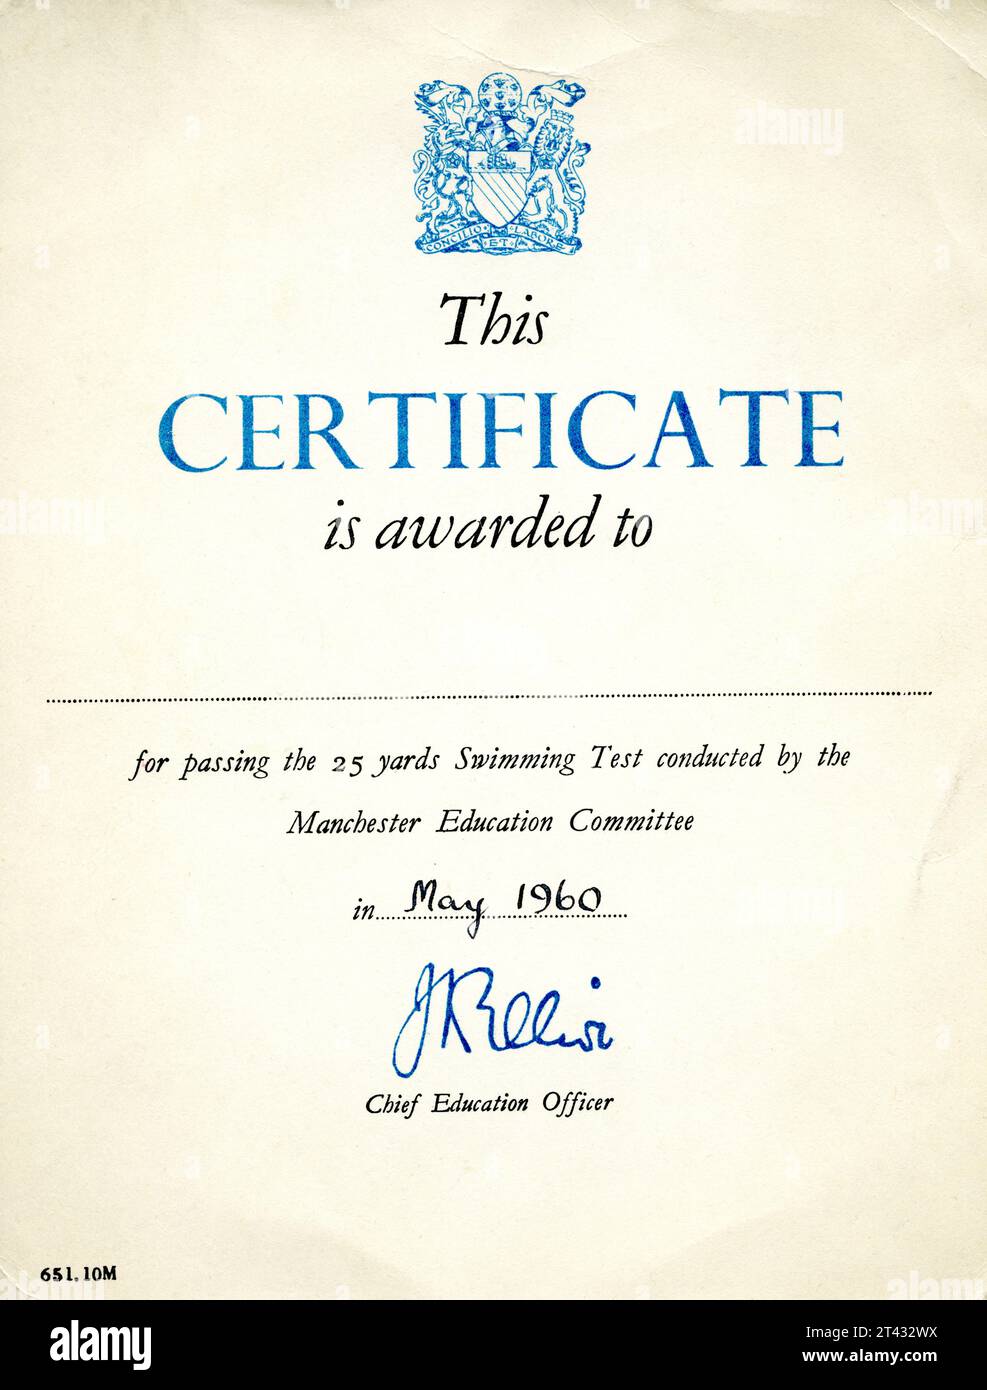 Swimming certificate issued by Manchester Education Committee in May 1960.  Issued for passing the 25 yard swimming test.  Manchester UK. Stock Photo